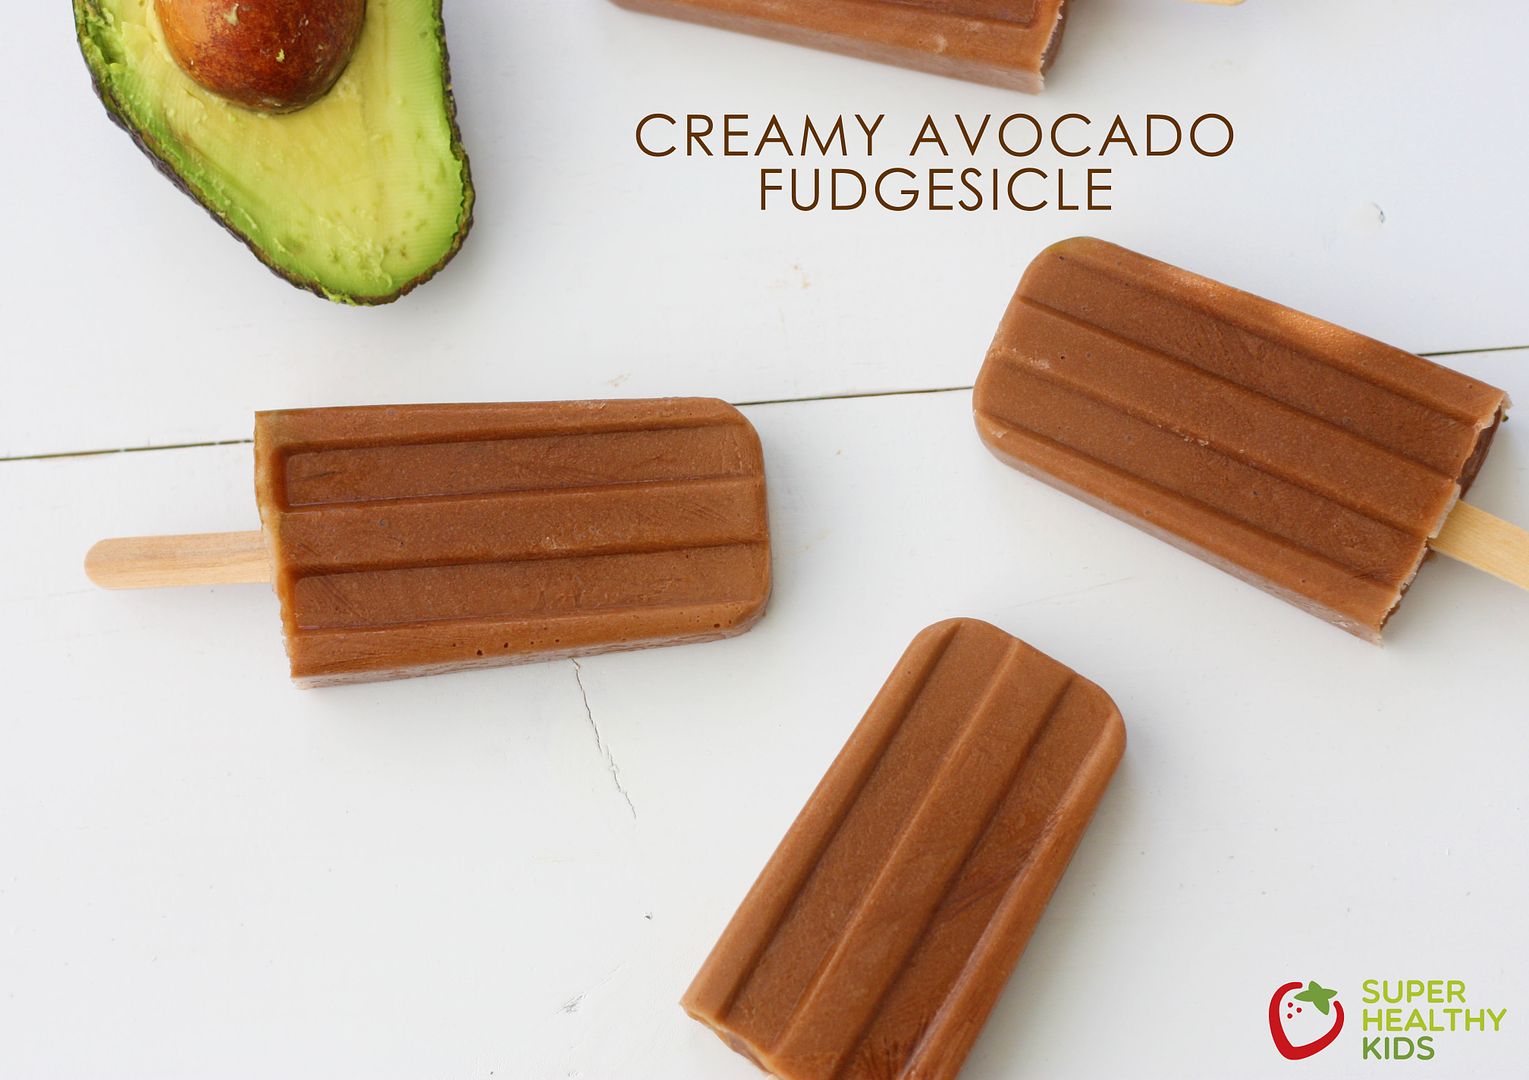 Popsicle recipes for kids: Creamy avocado fudgesicles | Super Healthy Kids